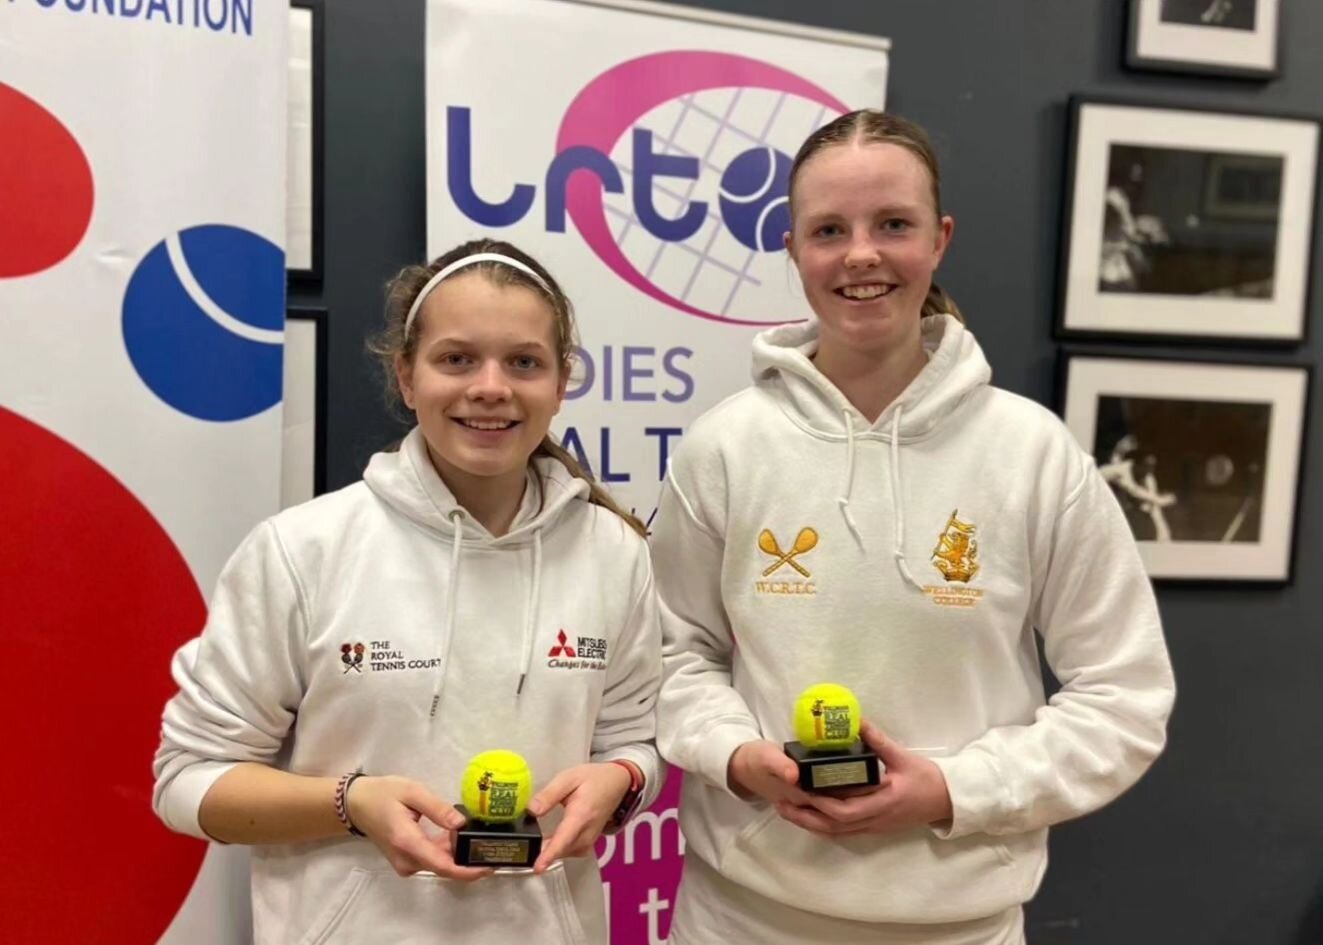 RTC duo win National School Girls Level Under 15 Singles &amp; Doubles Championships. Congratulations to Darcie &amp; Eddie on a successful weekend with Darcie winning the singles &amp; the doubles competition with sister Eddie. Darcie holds both U19